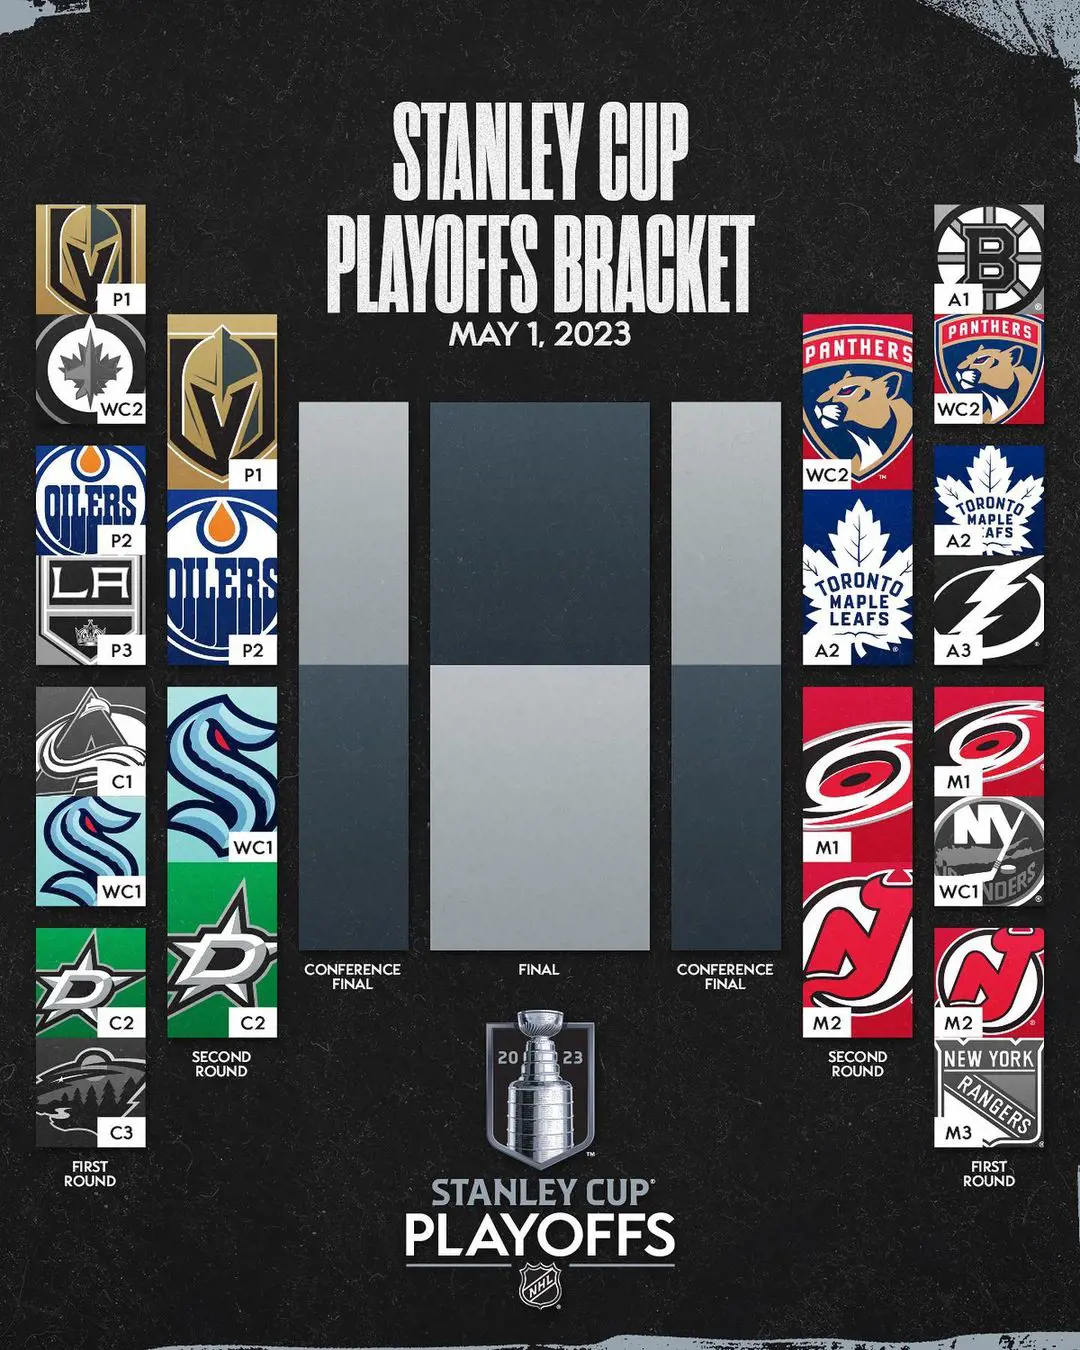 Stanley Cup playoffs started on April 17, 2023